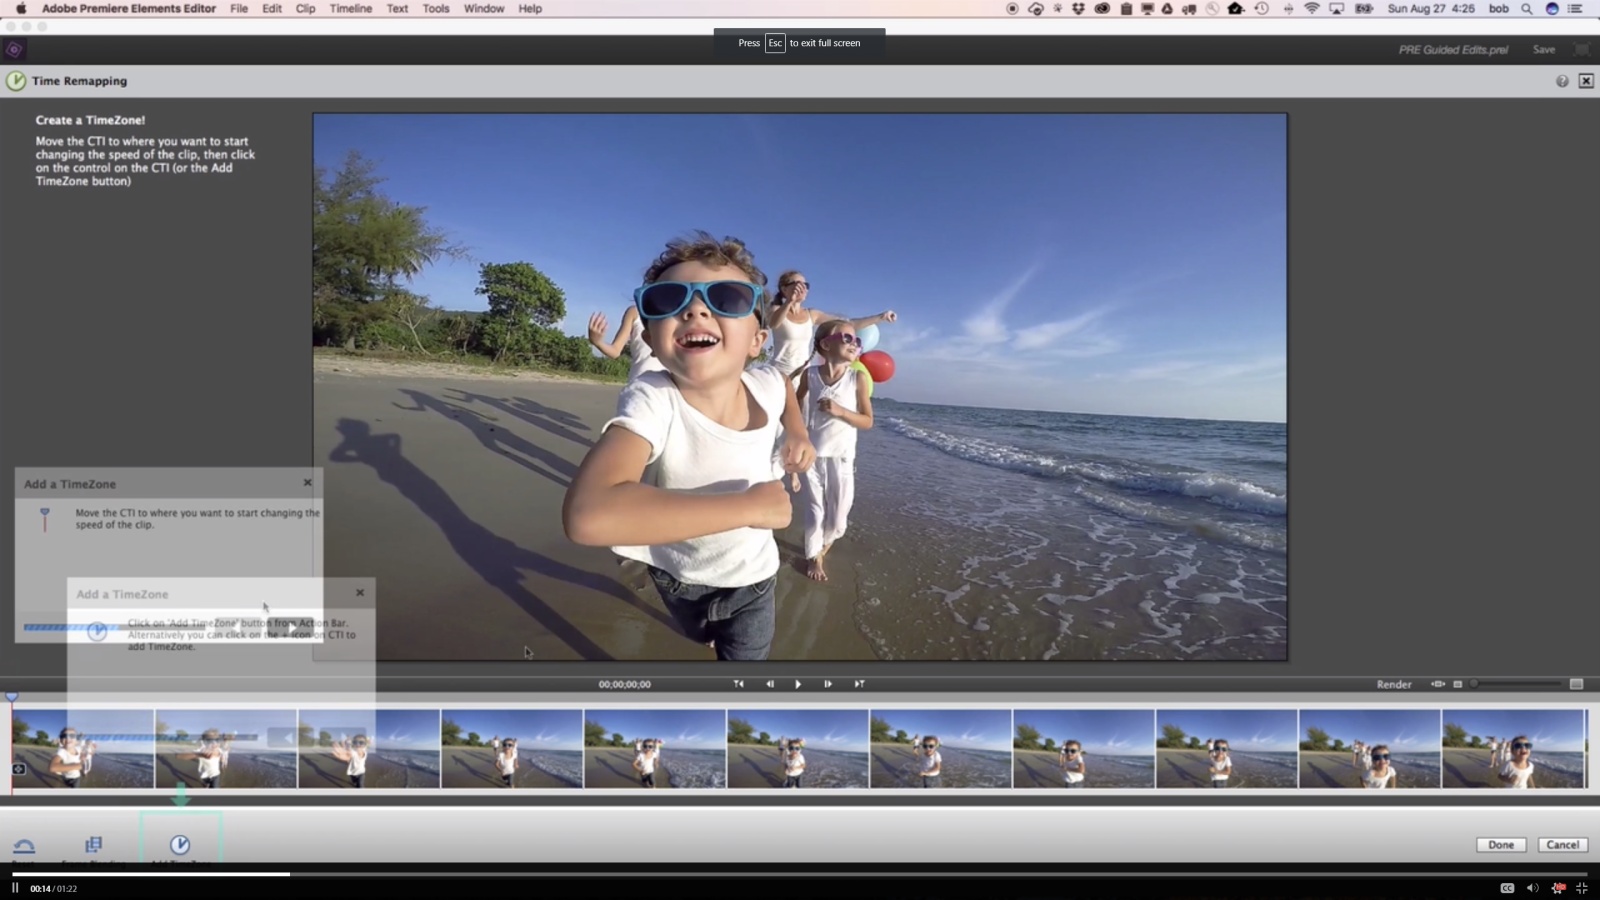 Download Free Adobe Photoshop For Mac Full Version